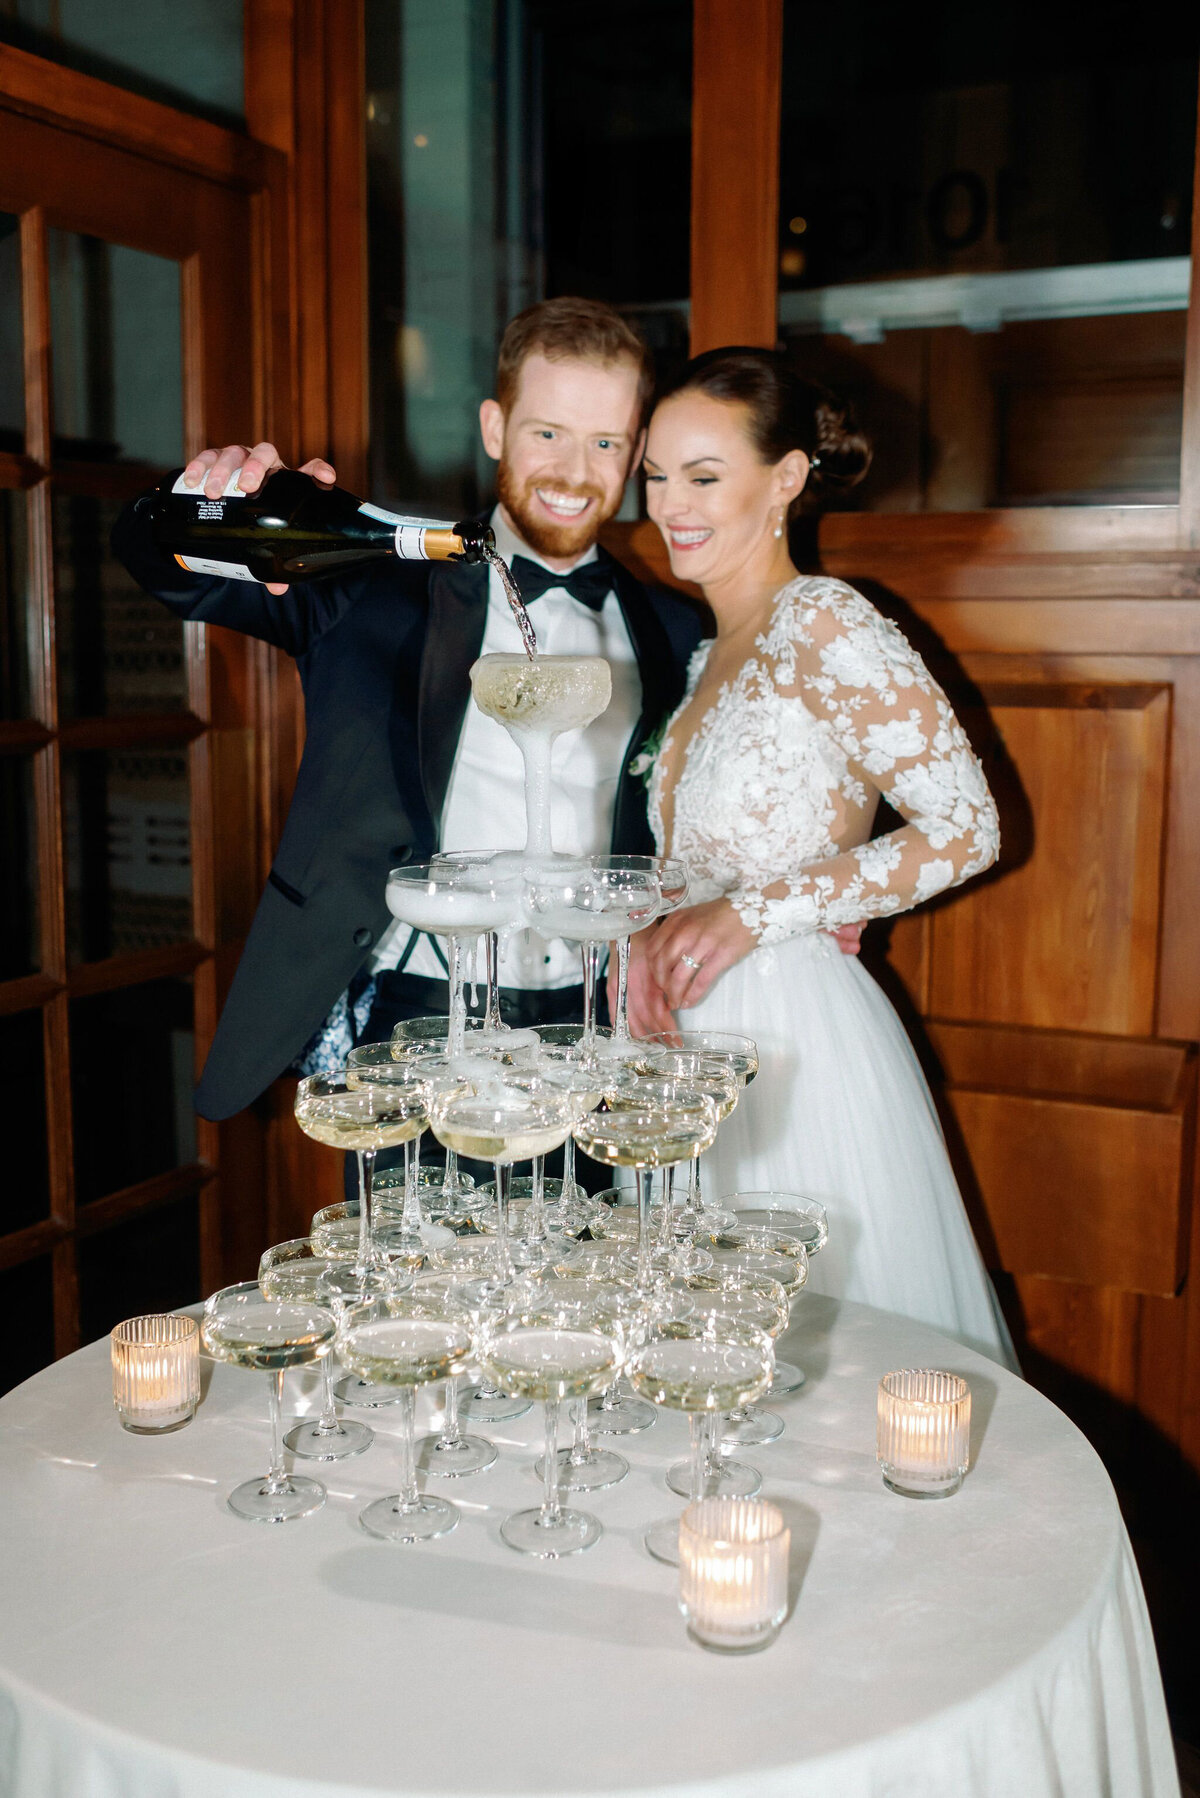 Couple pouring champagne into champagne tower during reception by Kaity Body Photography, film inspired wedding photographer in Calgary, Alberta. Featured on the Bronte Bride Vendor Guide.